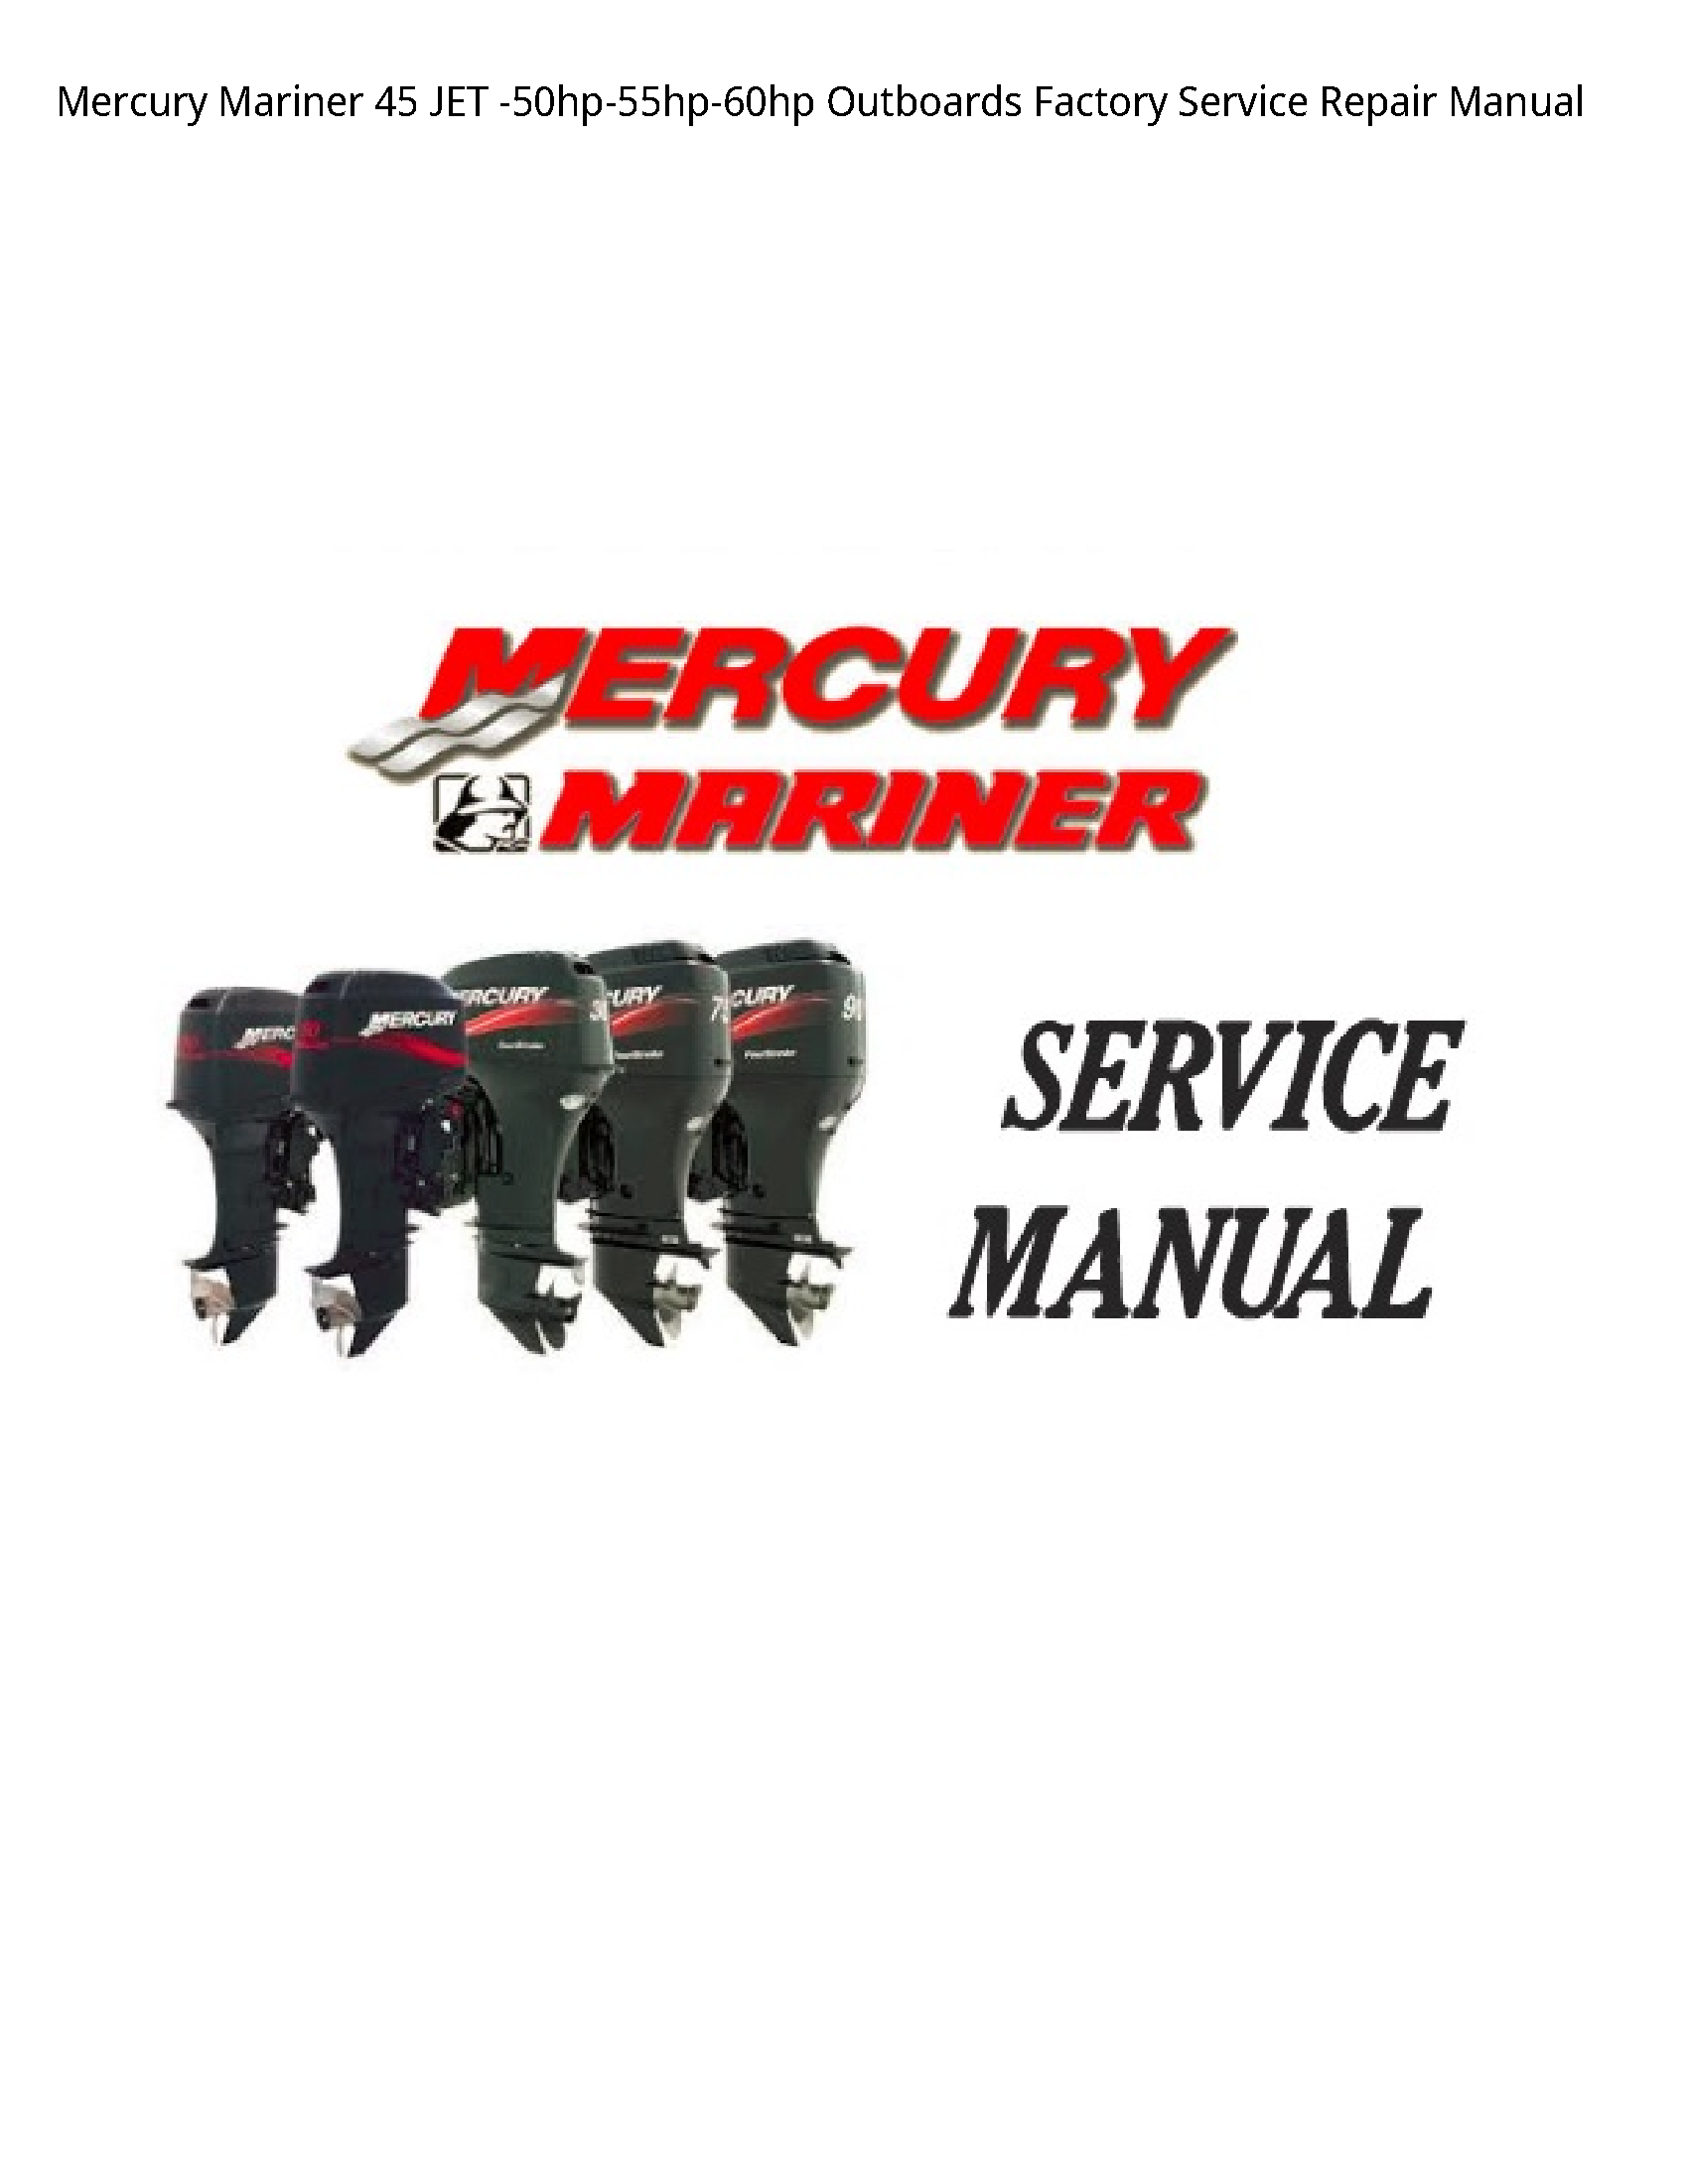 Mercury Mariner 45 JET Outboards Factory manual